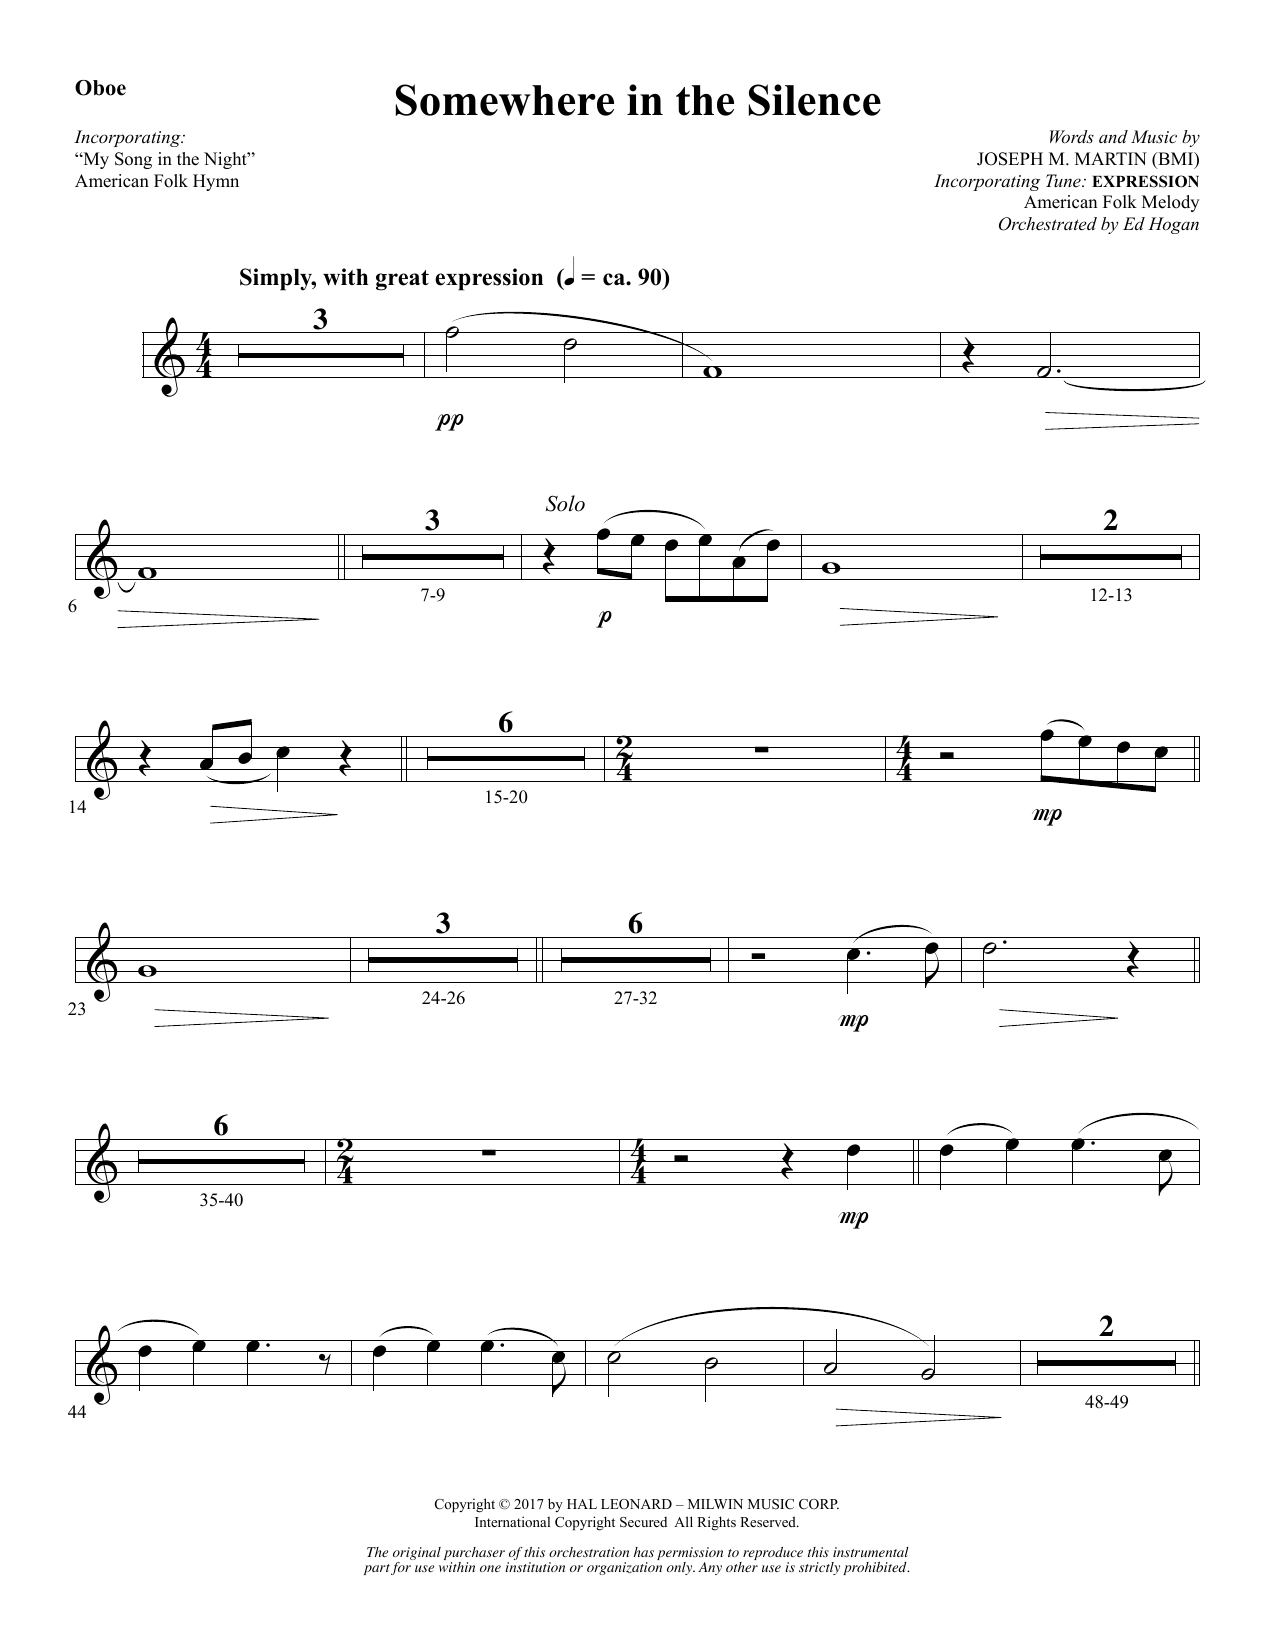 Download Joseph M. Martin Somewhere in the Silence - Oboe Sheet Music